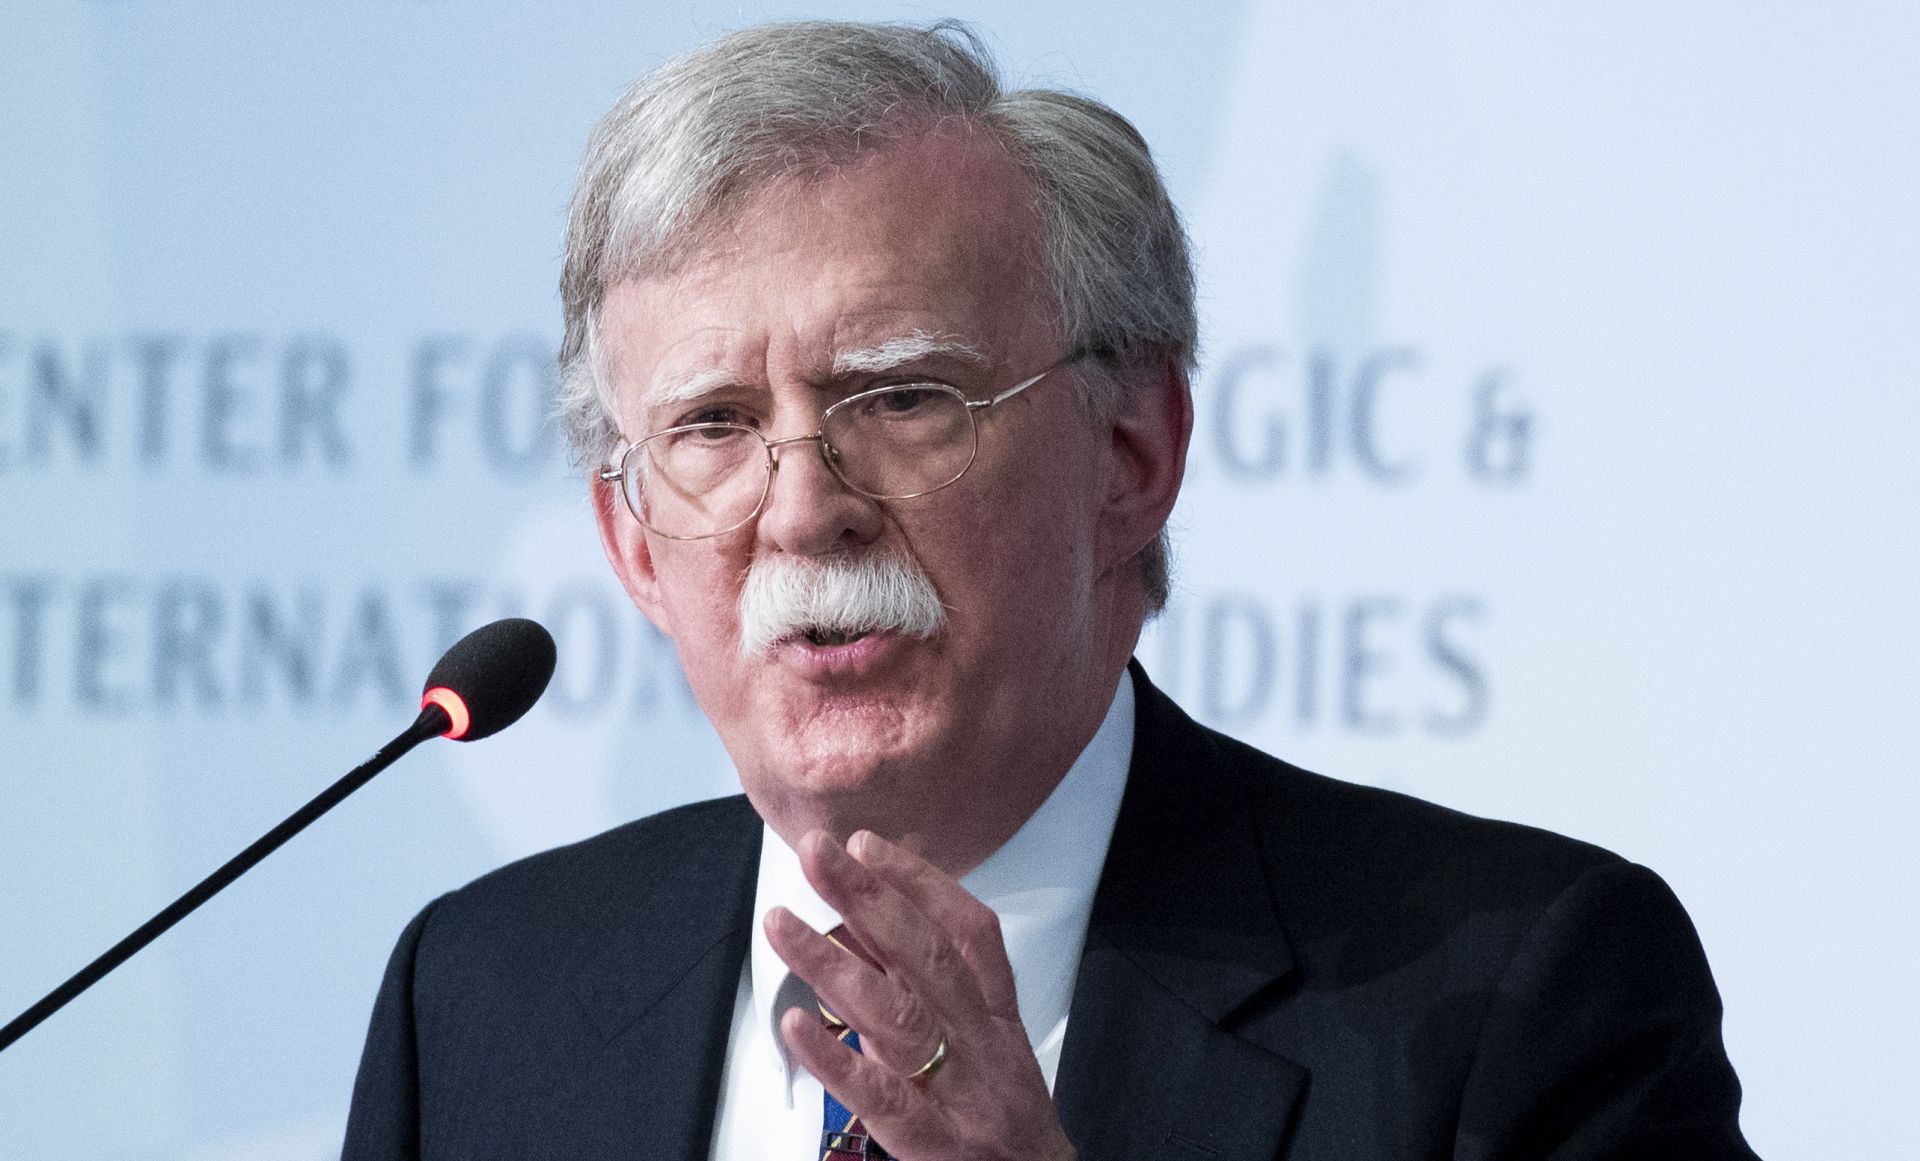 epa07882380 Former US National Security Advisor John Bolton delivers the keynote address of the 'JoongAng Ilbo-CSIS Forum 2019', at the Center for Strategic and International Studies (CSIS) in Washington, DC, USA, 30 September 2019. The subject of the 2019 forum is 'Navigating Geostrategic Flux in Asia - The United States and Korea'. Bolton, who was replaced as national security advisor by State Department official Robert O'Brien, was ousted by Trump following disagreements on foreign policy, according to media reports.  EPA/MICHAEL REYNOLDS